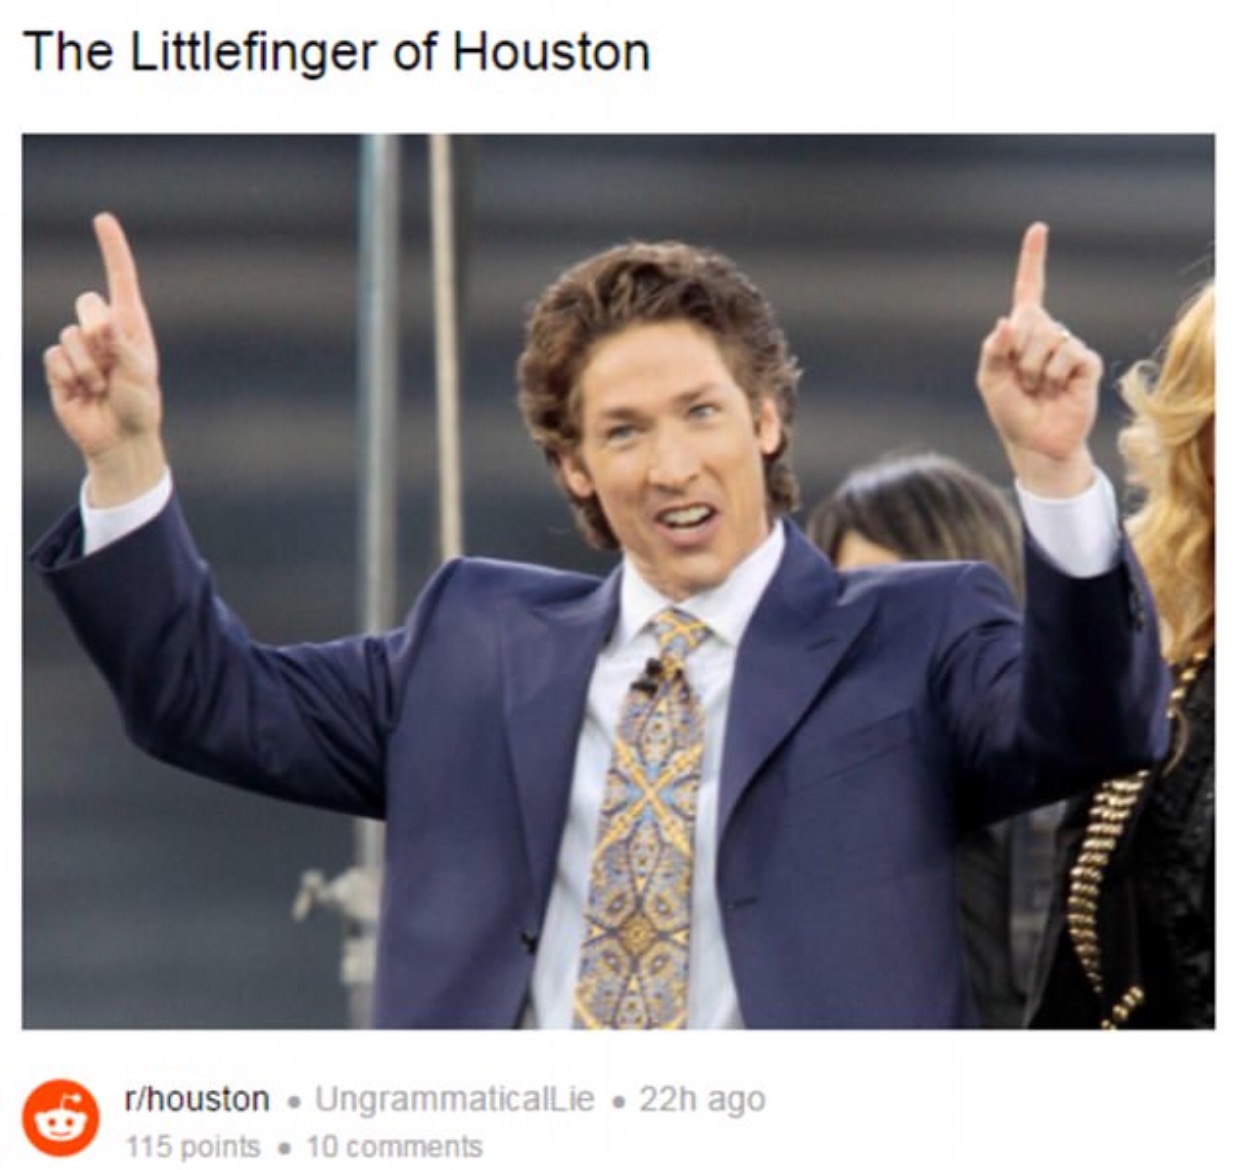 15 Joel Osteen Memes That Might Outrage You